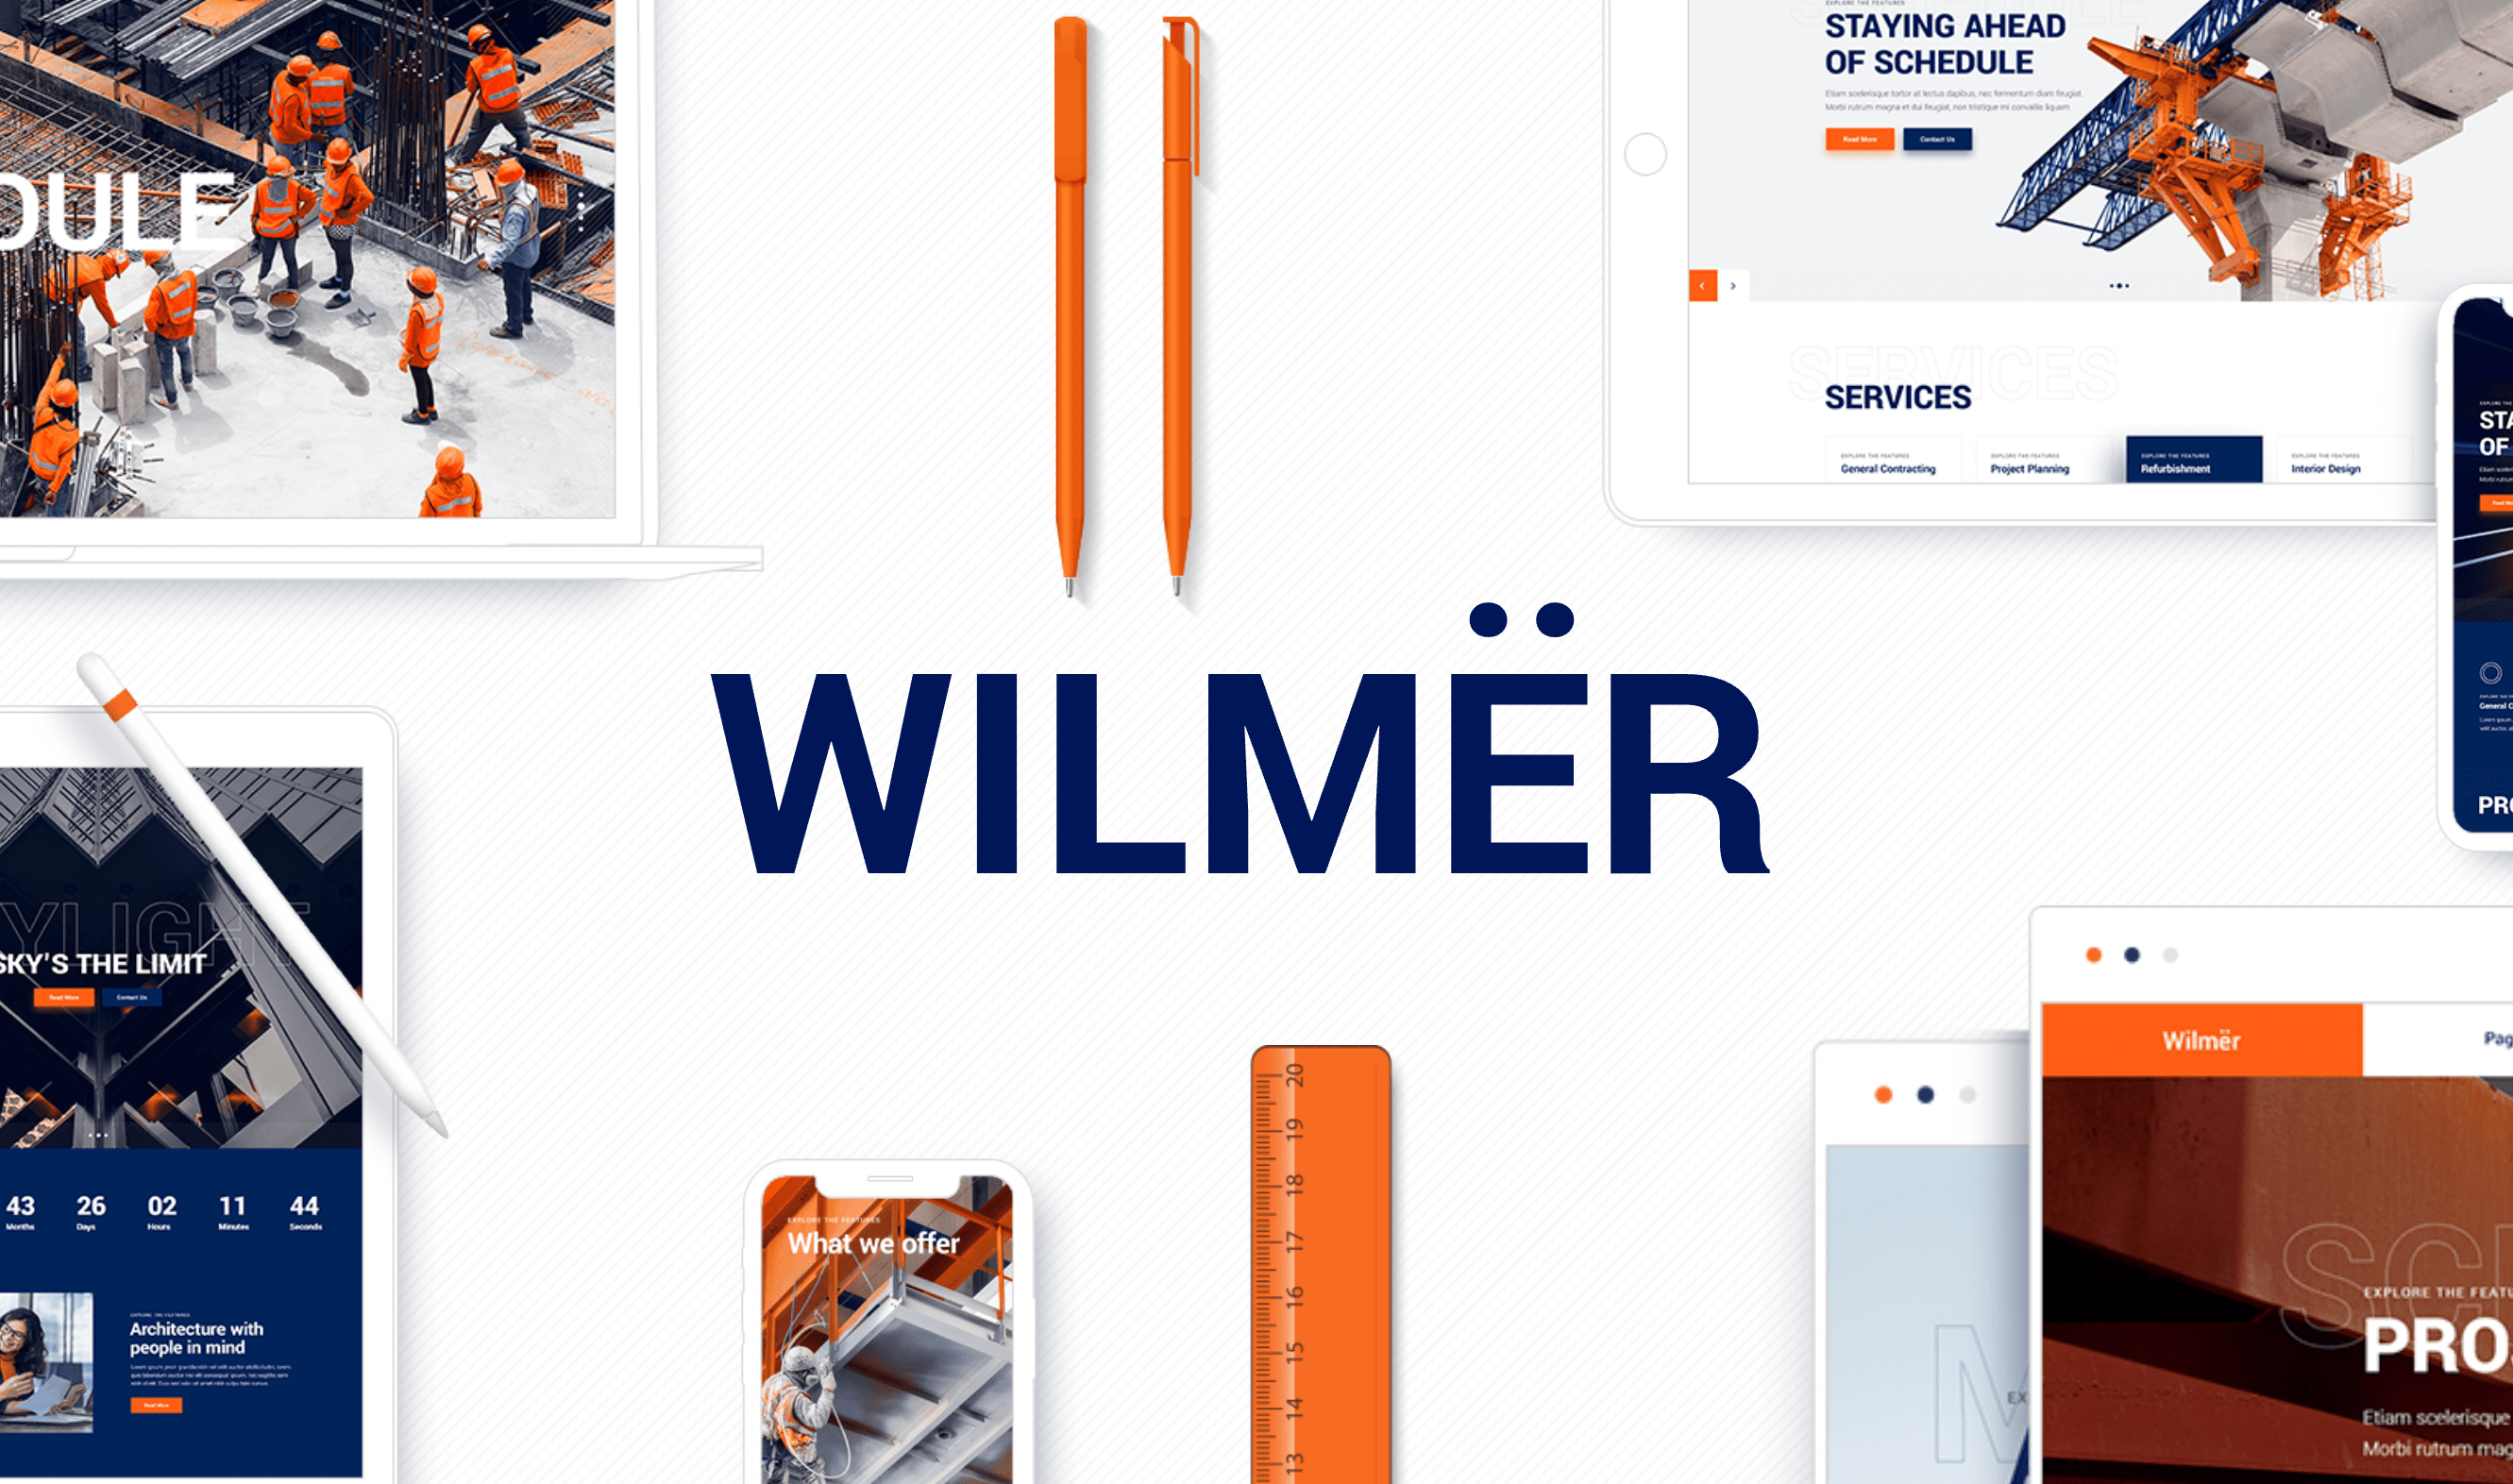 Wilmër is a construction theme that can be used as a property management website template.